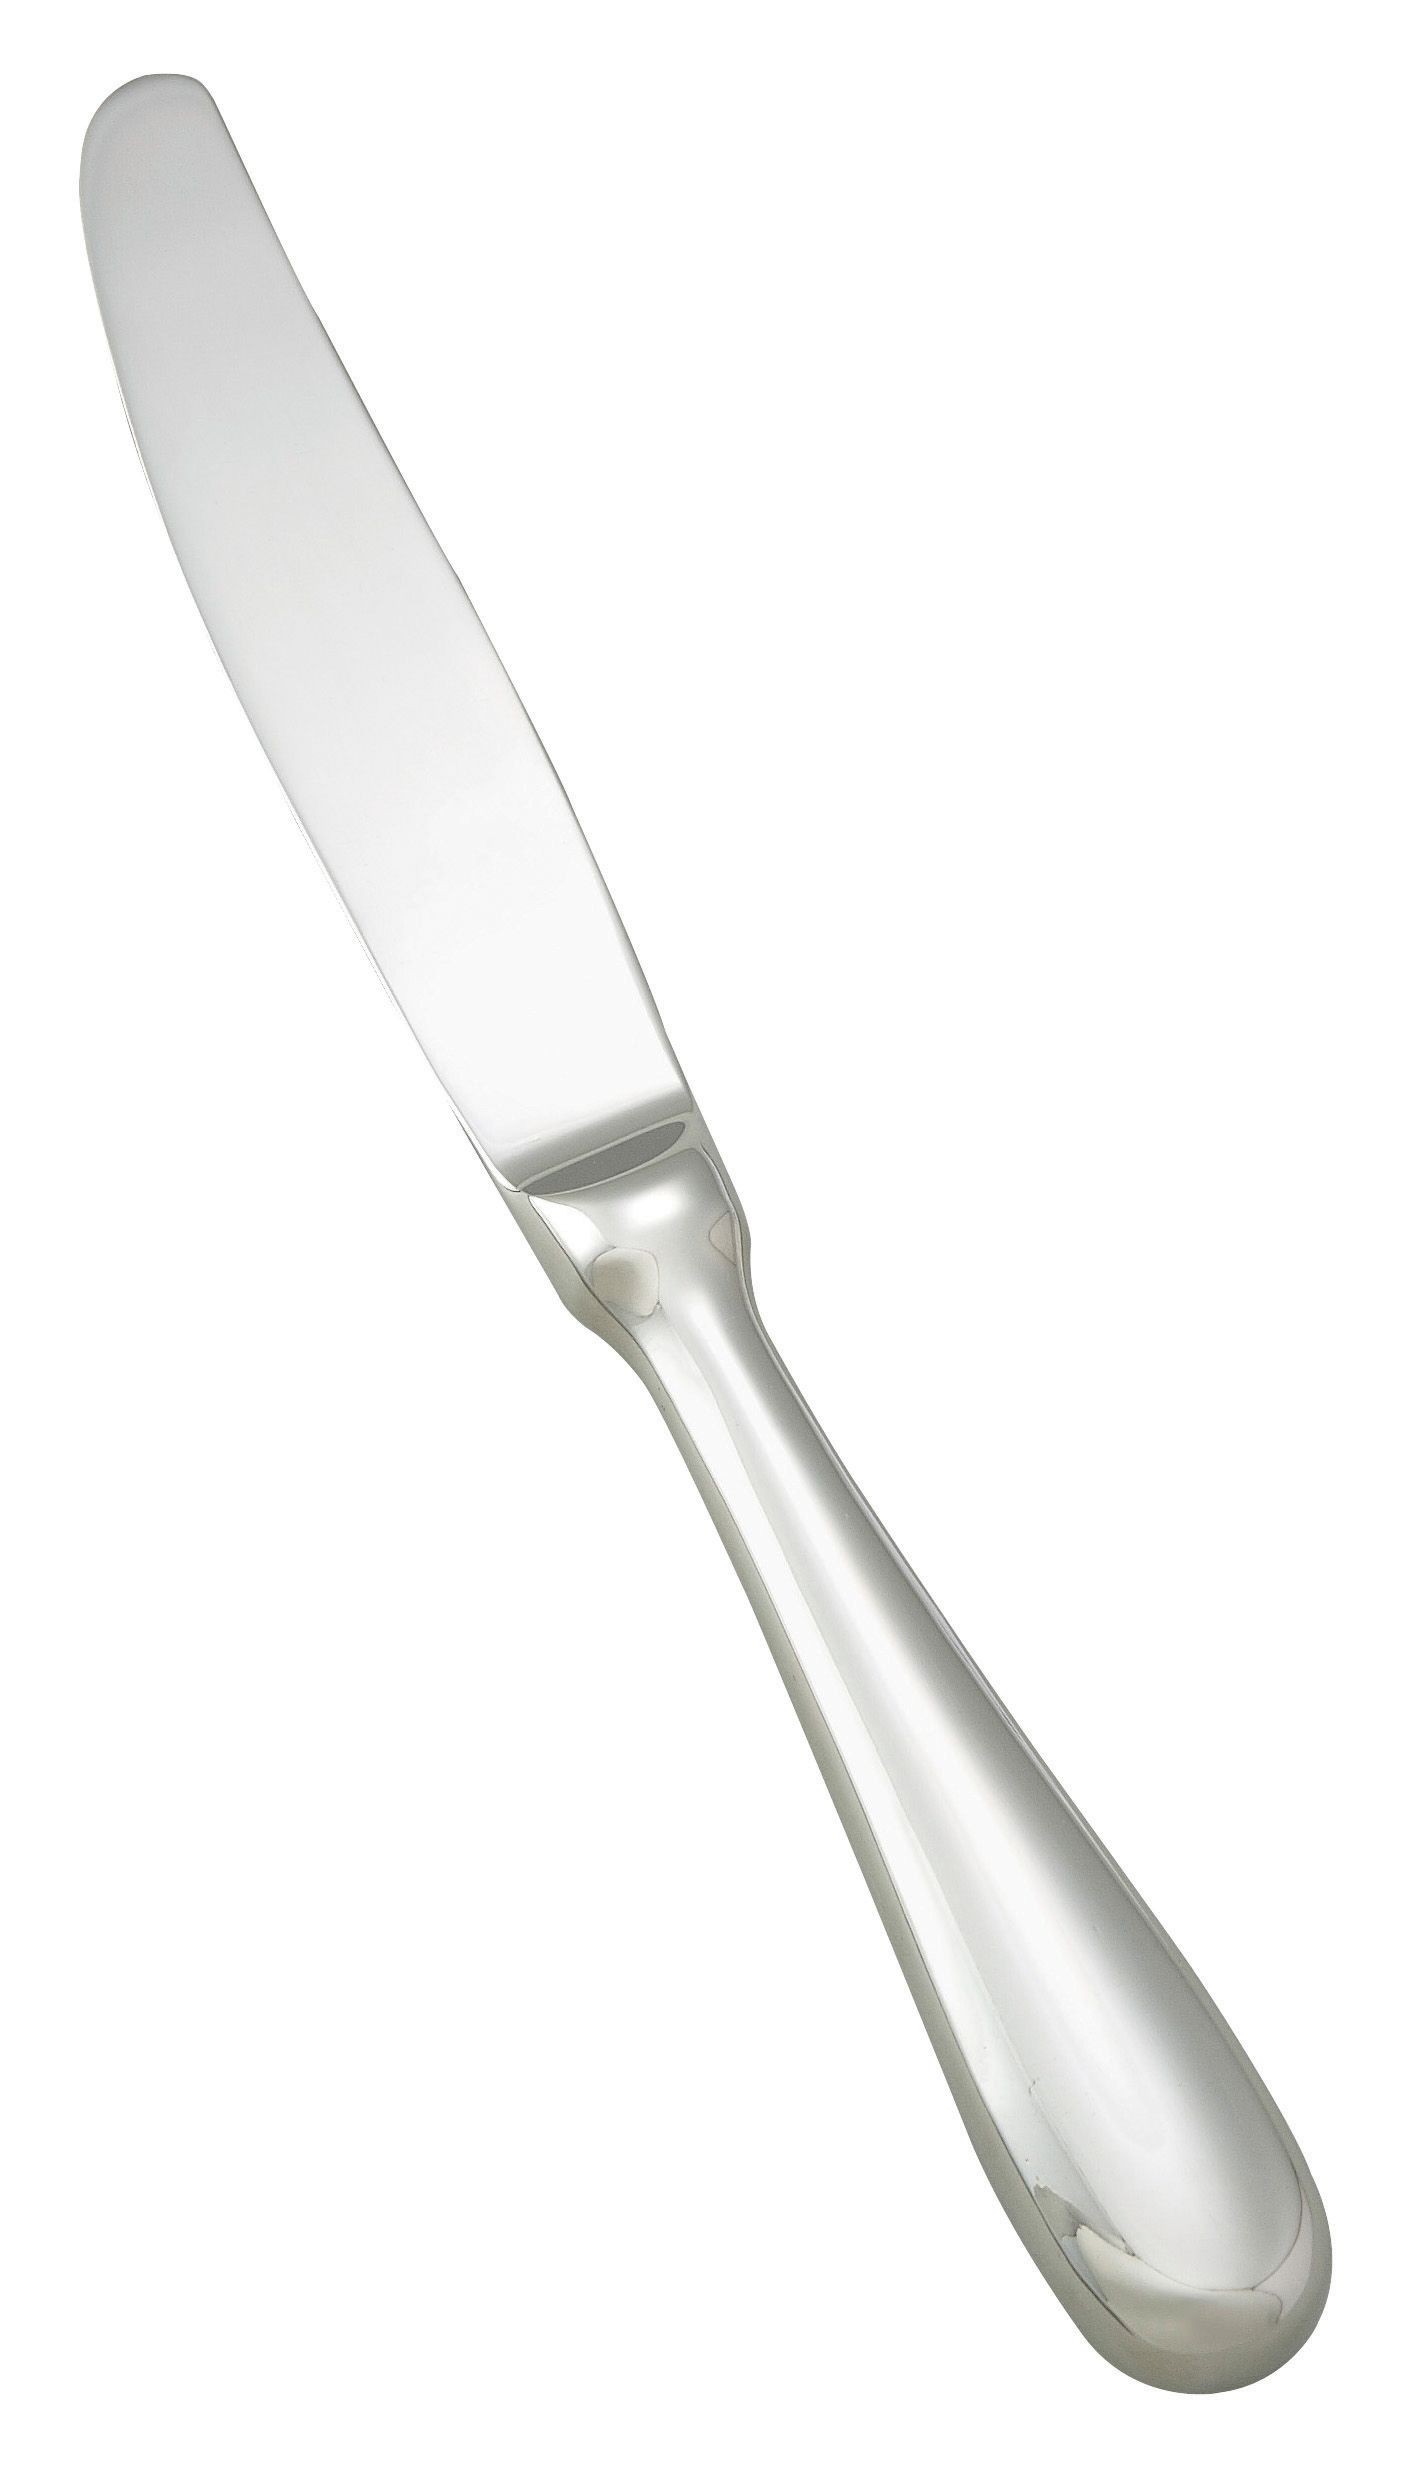 Winco 0034-15 Stanford Extra Heavy Stainless Steel Hollow Handle Dinner Knife (12/Pack)